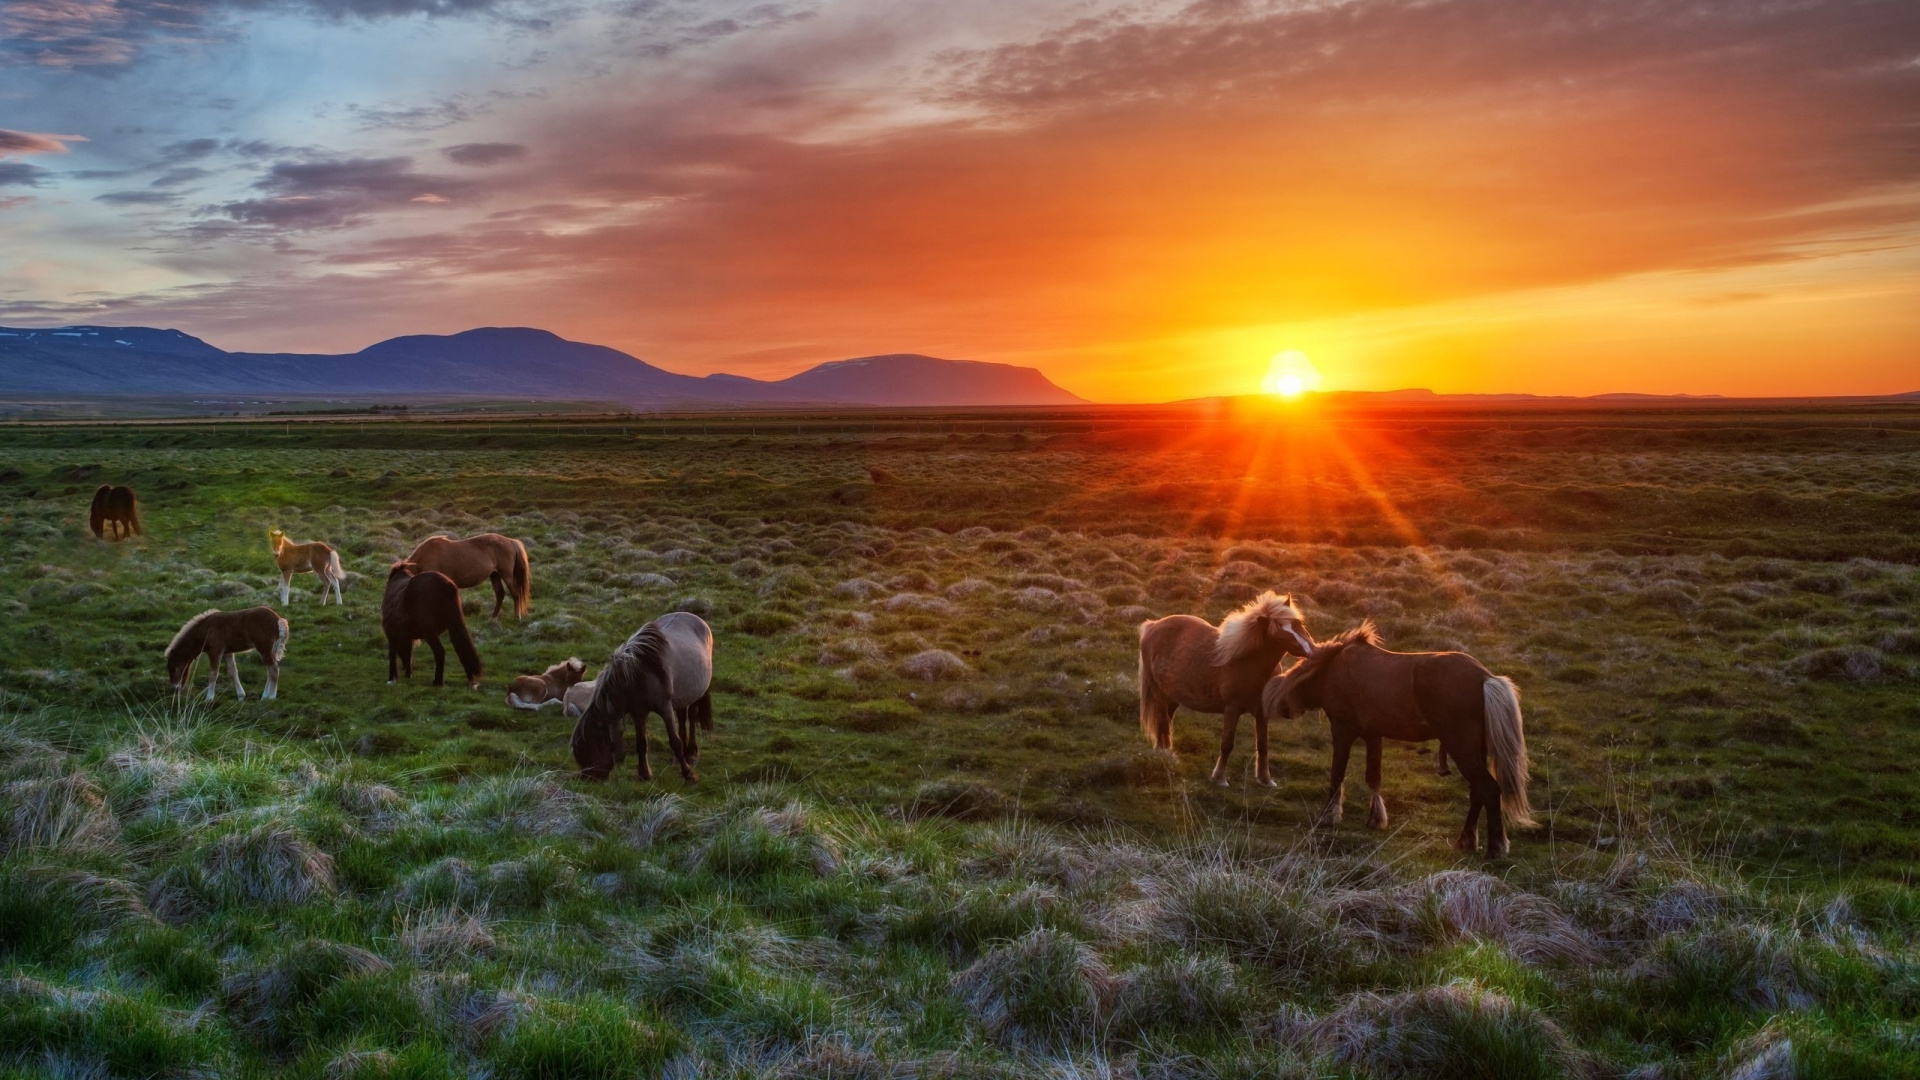 Herd of Horses on Green Grass Field During Sunset. Wallpaper in 1920x1080 Resolution